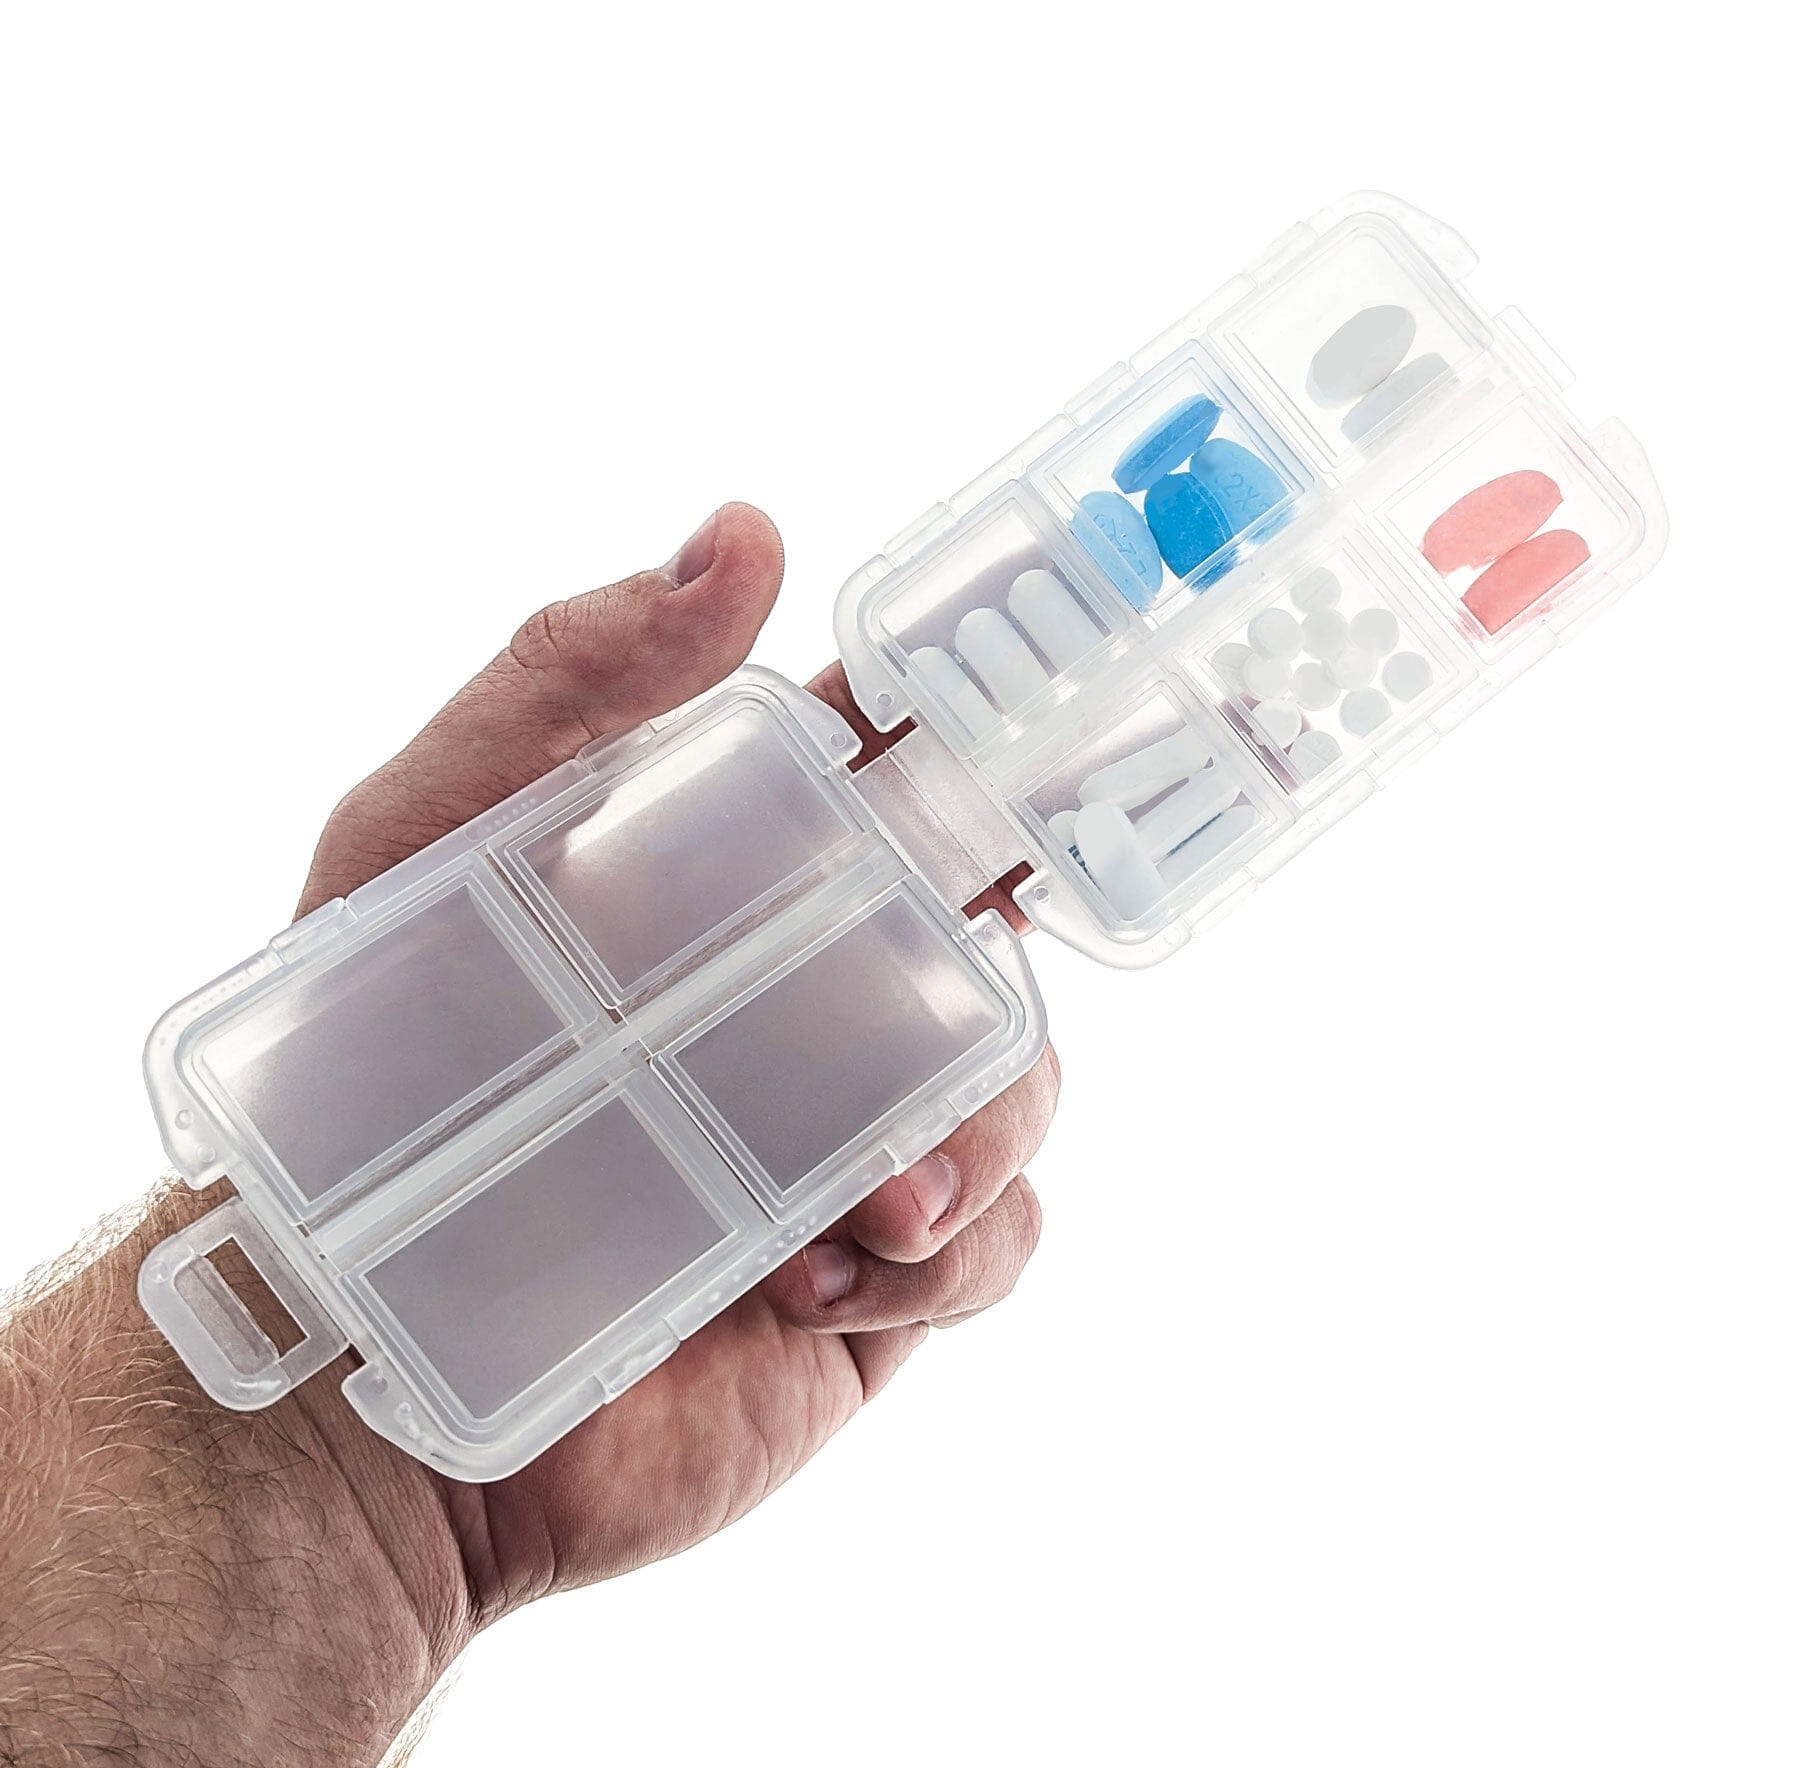 10 Compartment Folding Organizer (6 Compartments 1"x1"/4 Compartments-1"x1/2"),FDA Approved Material